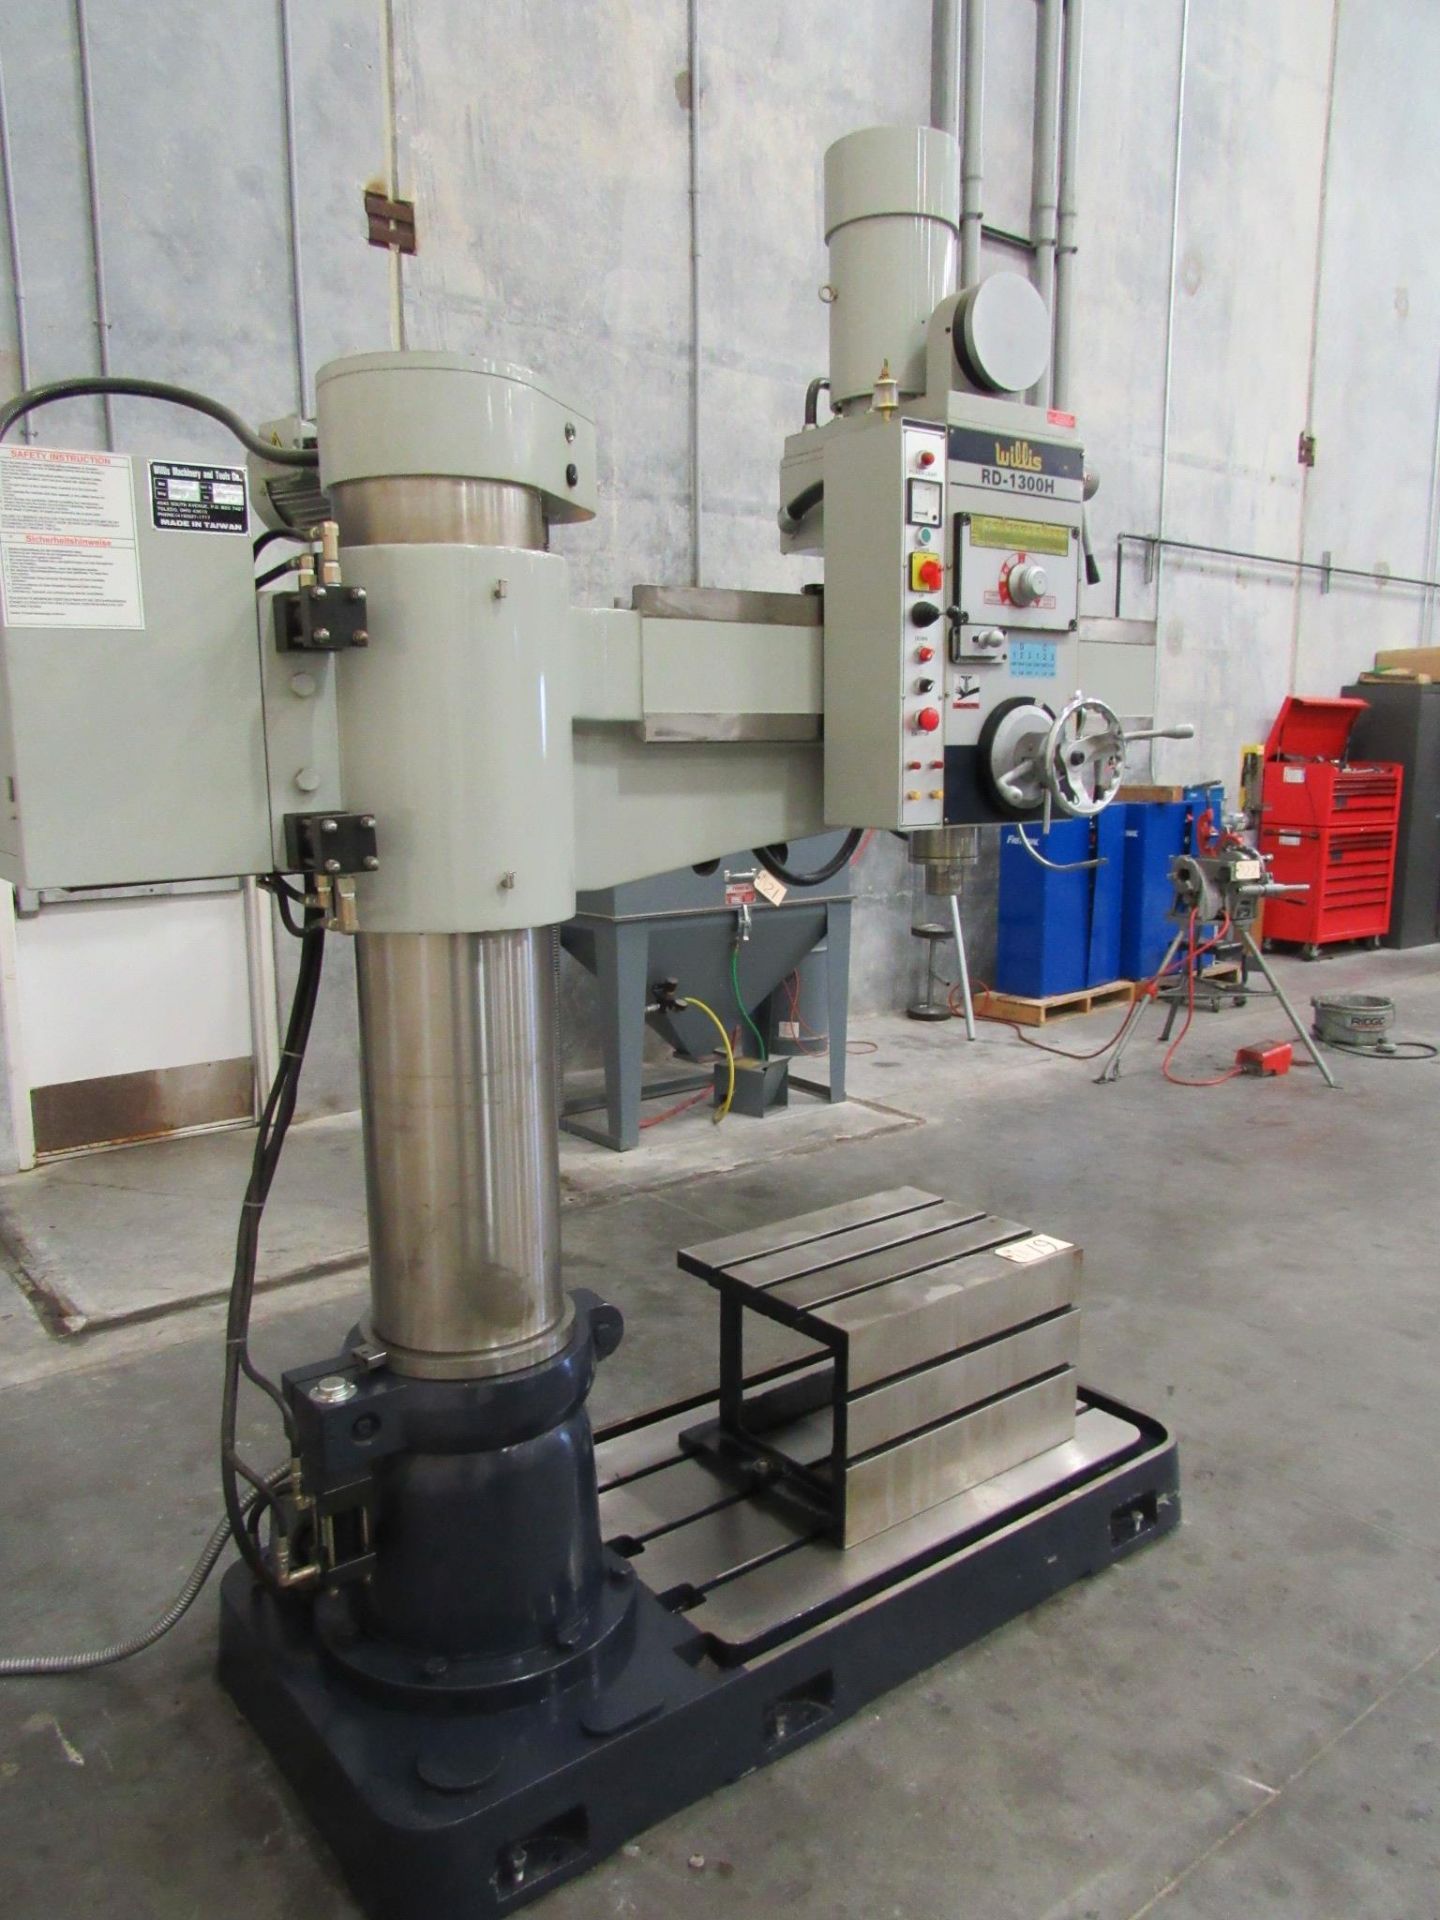 Willis Model RD-1300H Radial Arm Drill with T-Slotted Box Table, 30'' x 32'' Travels, Variable - Image 2 of 6